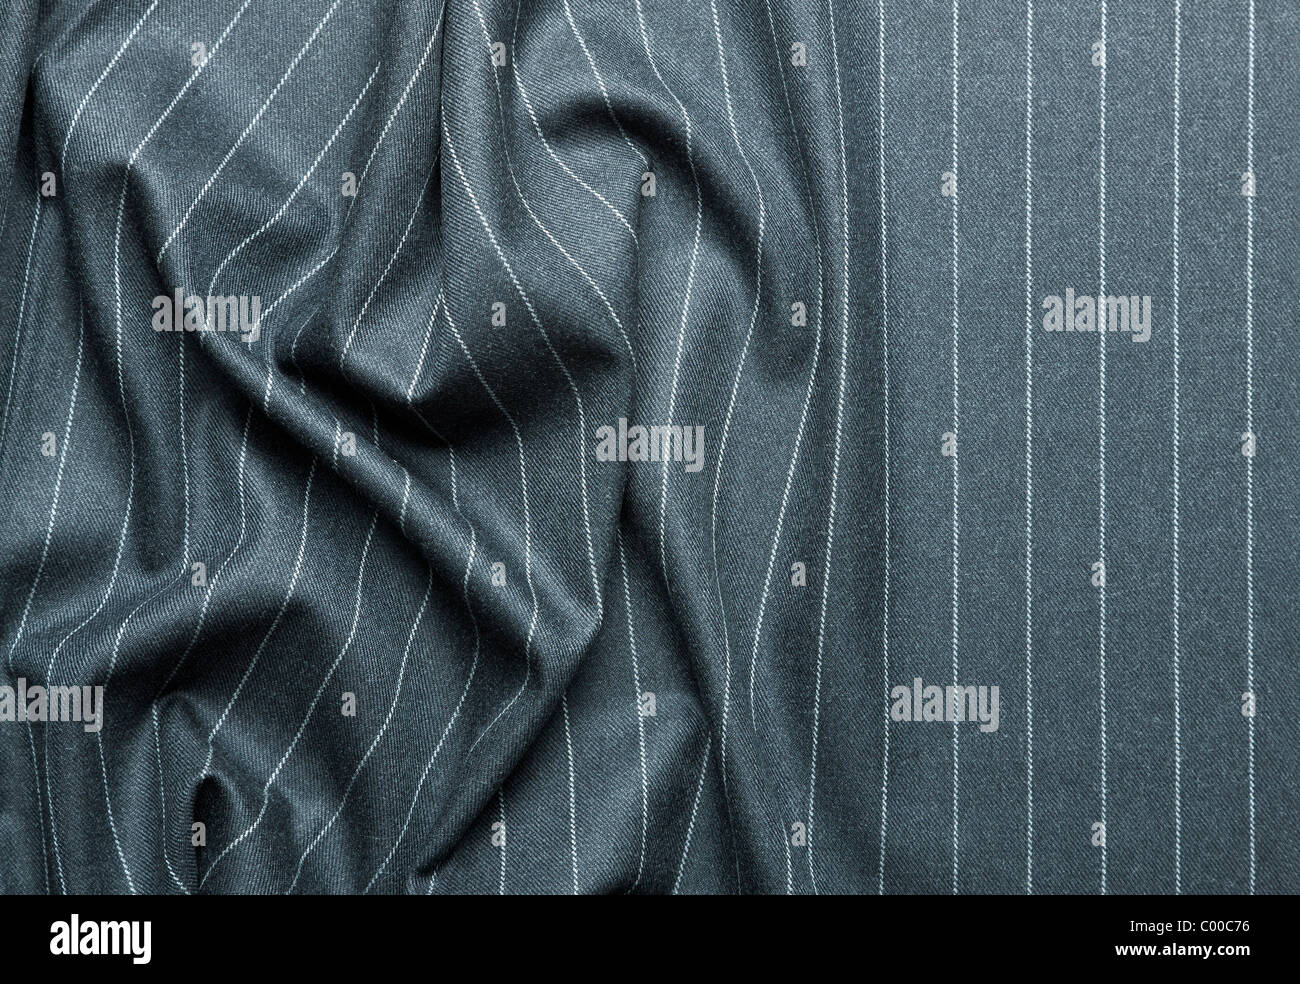 High quality pin stripe suit background texture Stock Photo